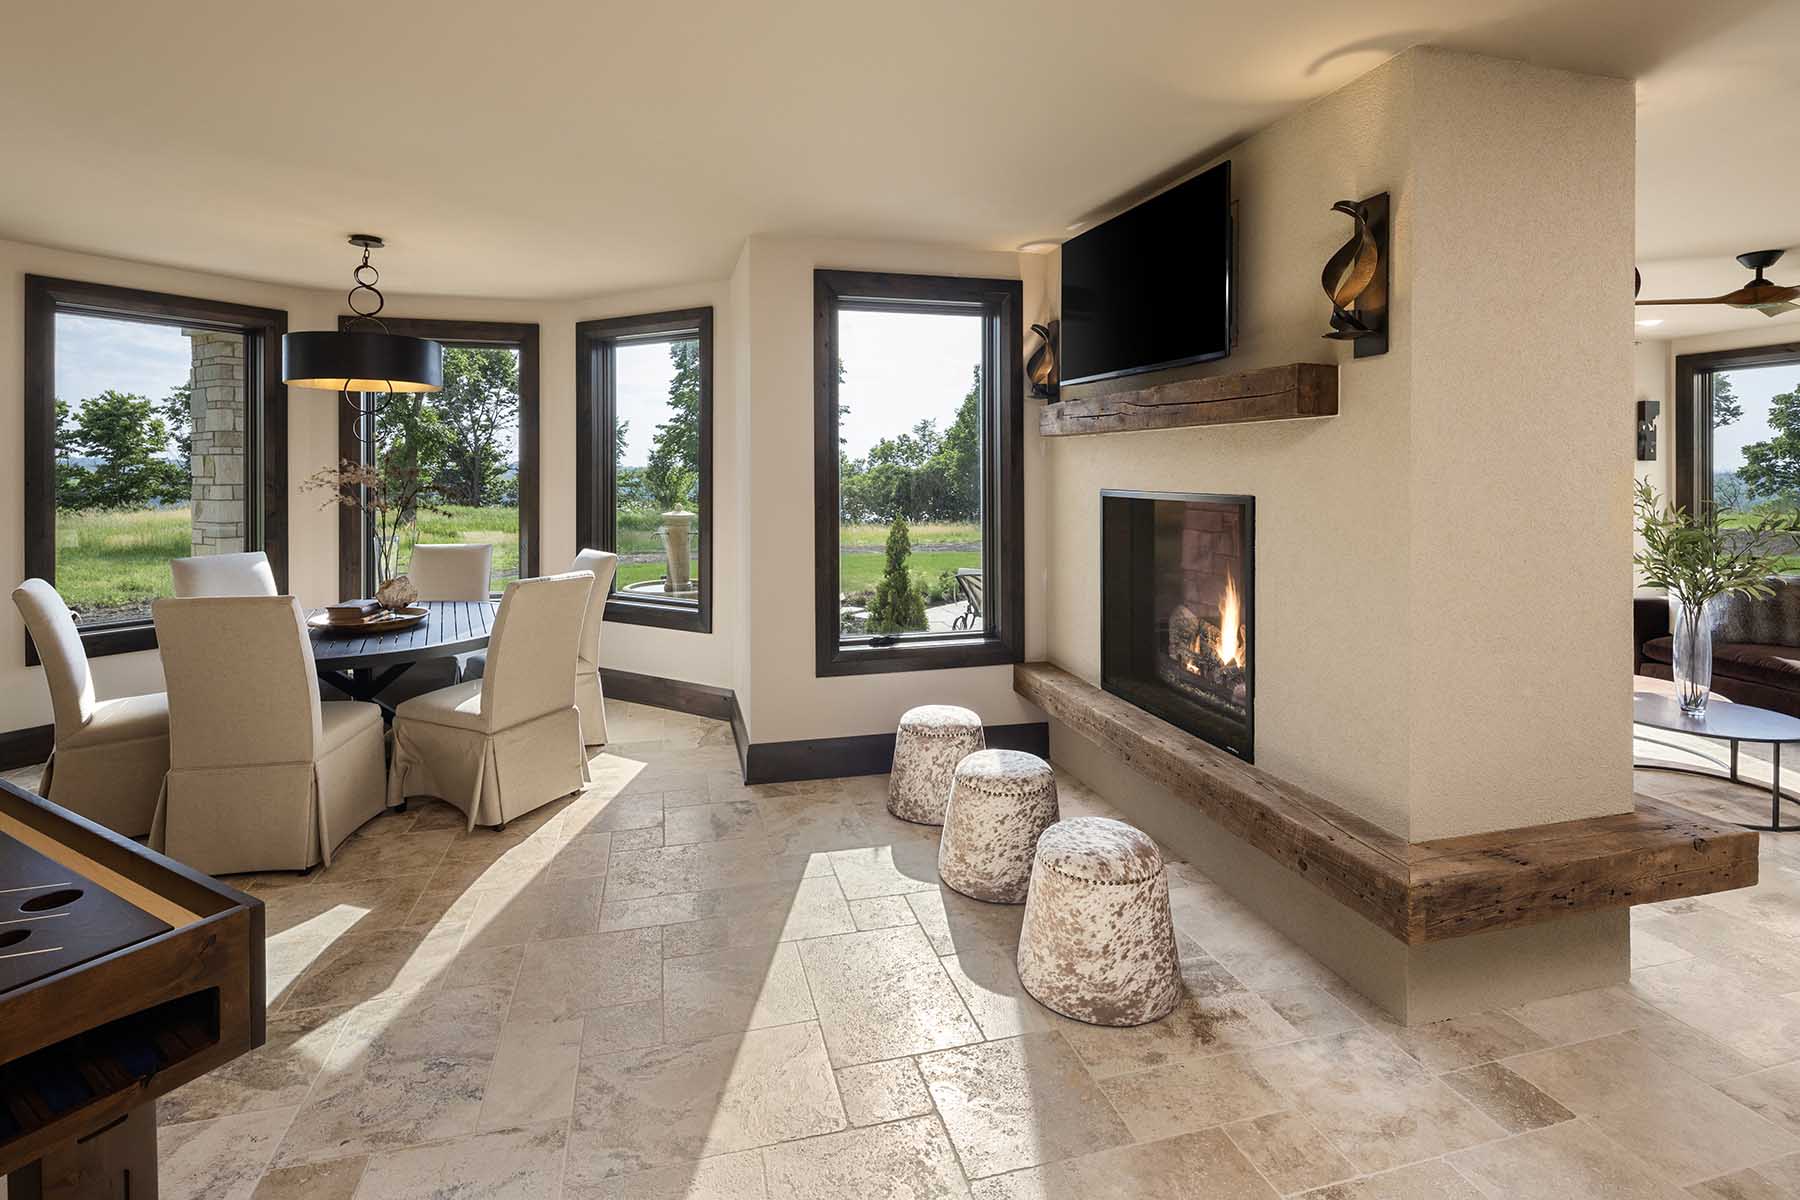 A modern living room with large windows and a fireplace in a Tuscan Mediterranean home.